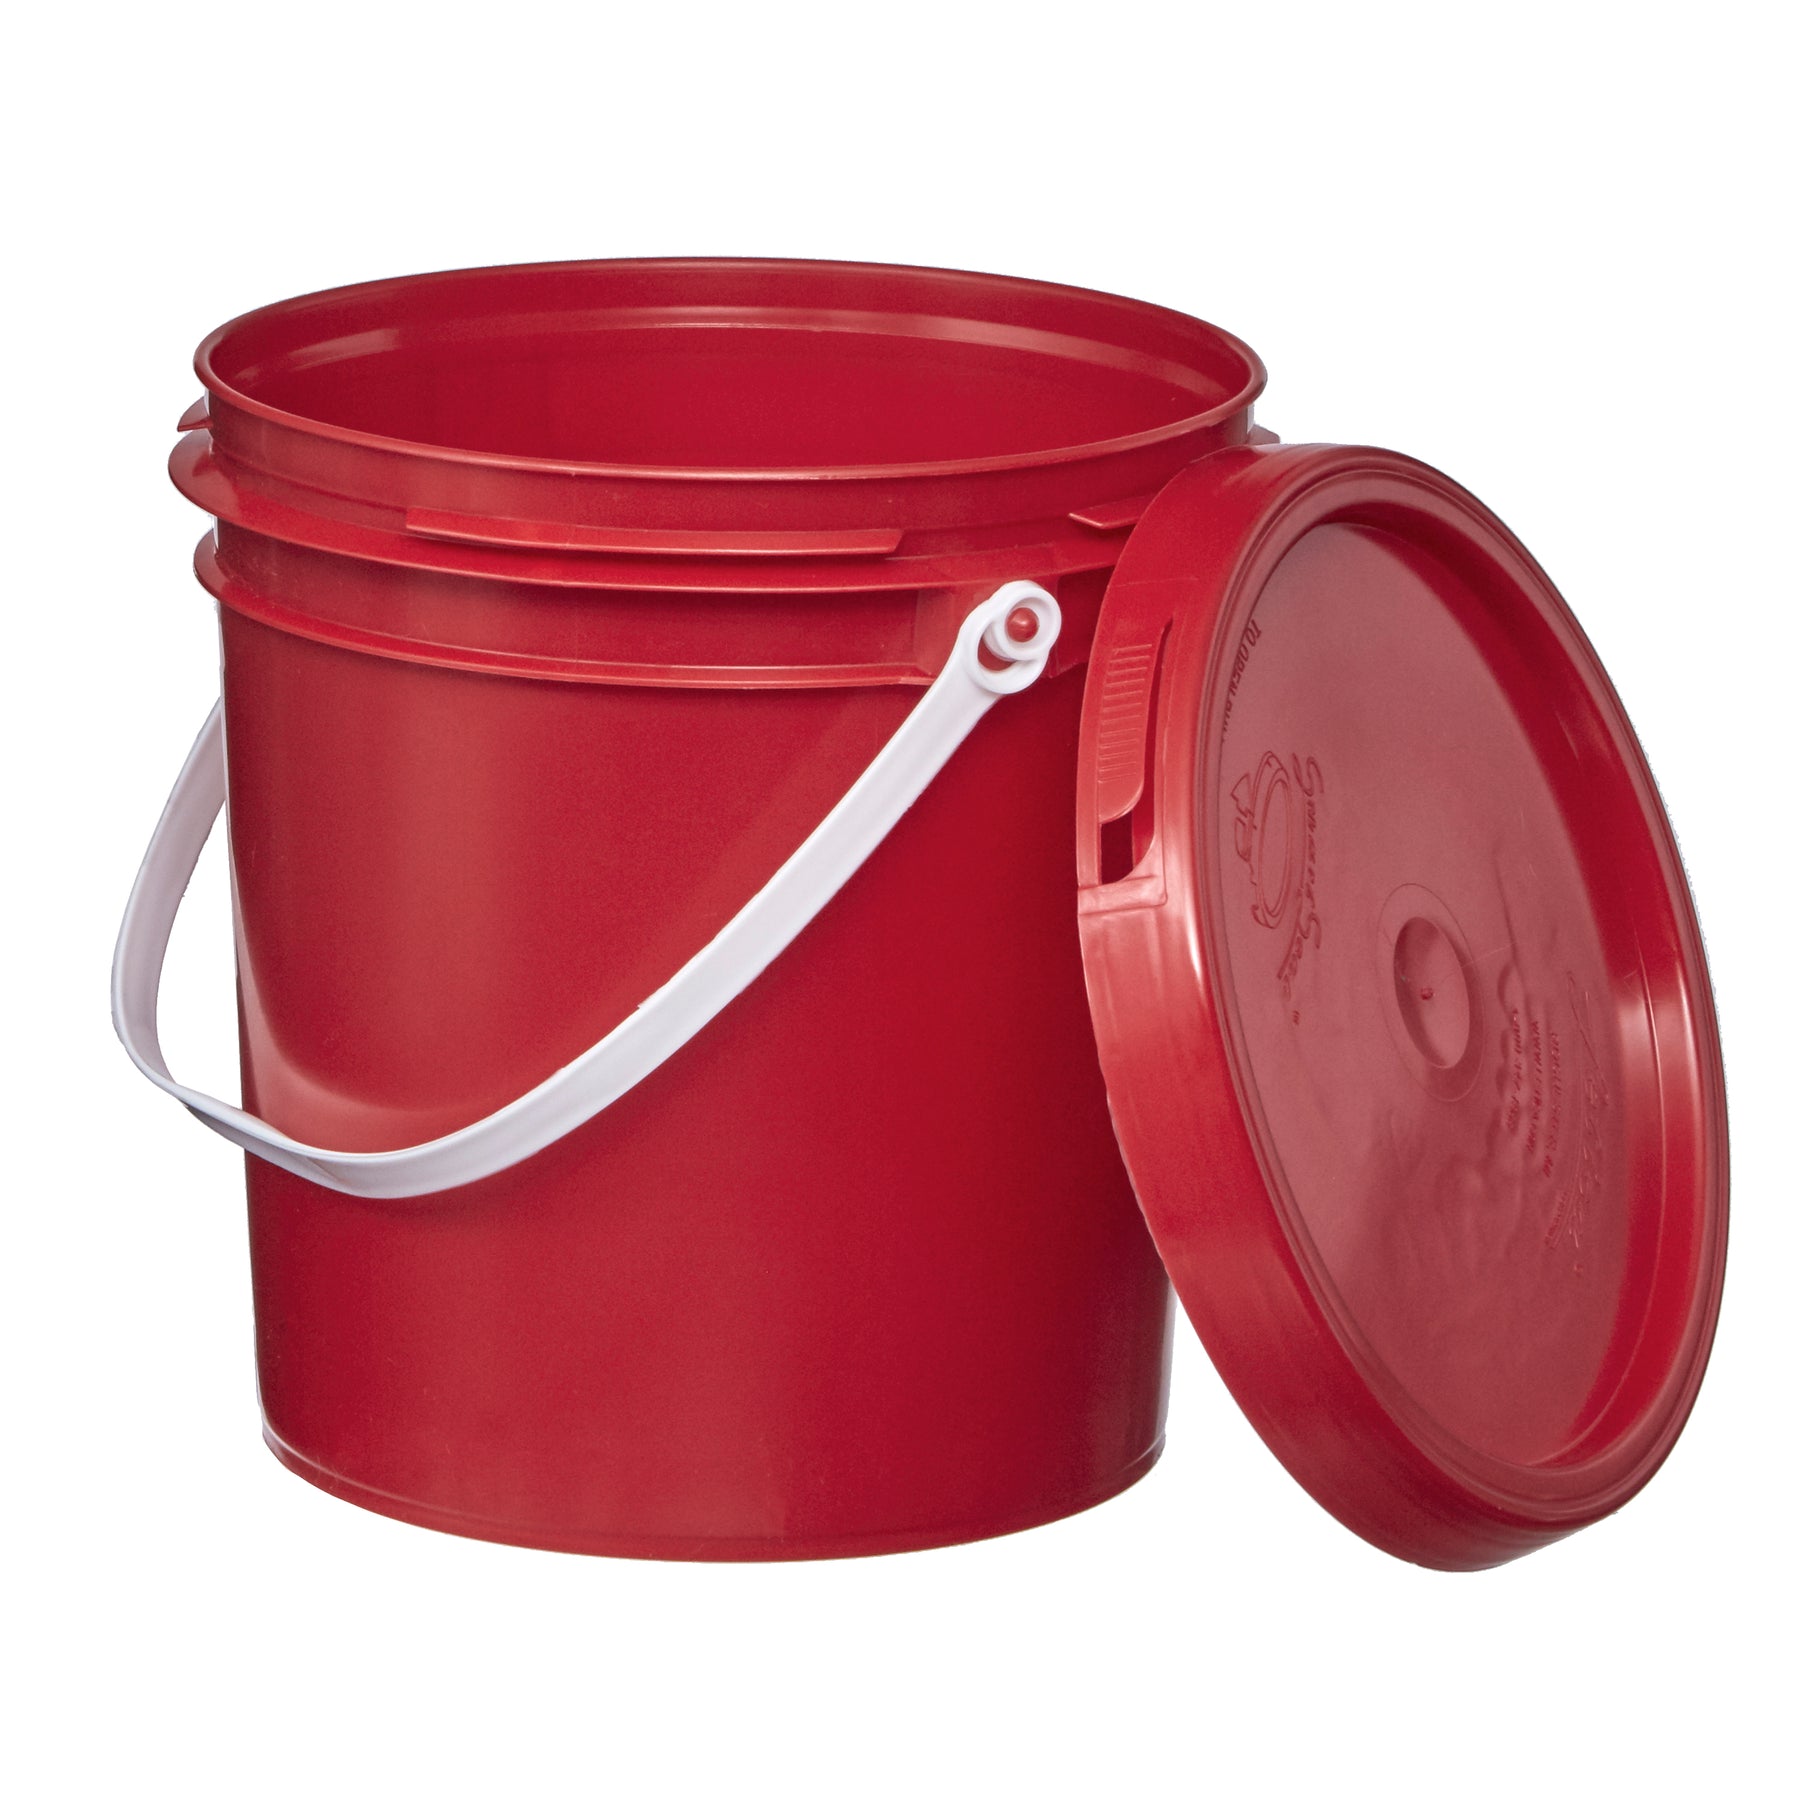 1 Gallon Pails - Plastic Handle # Pail Only, Red – Consolidated Plastics